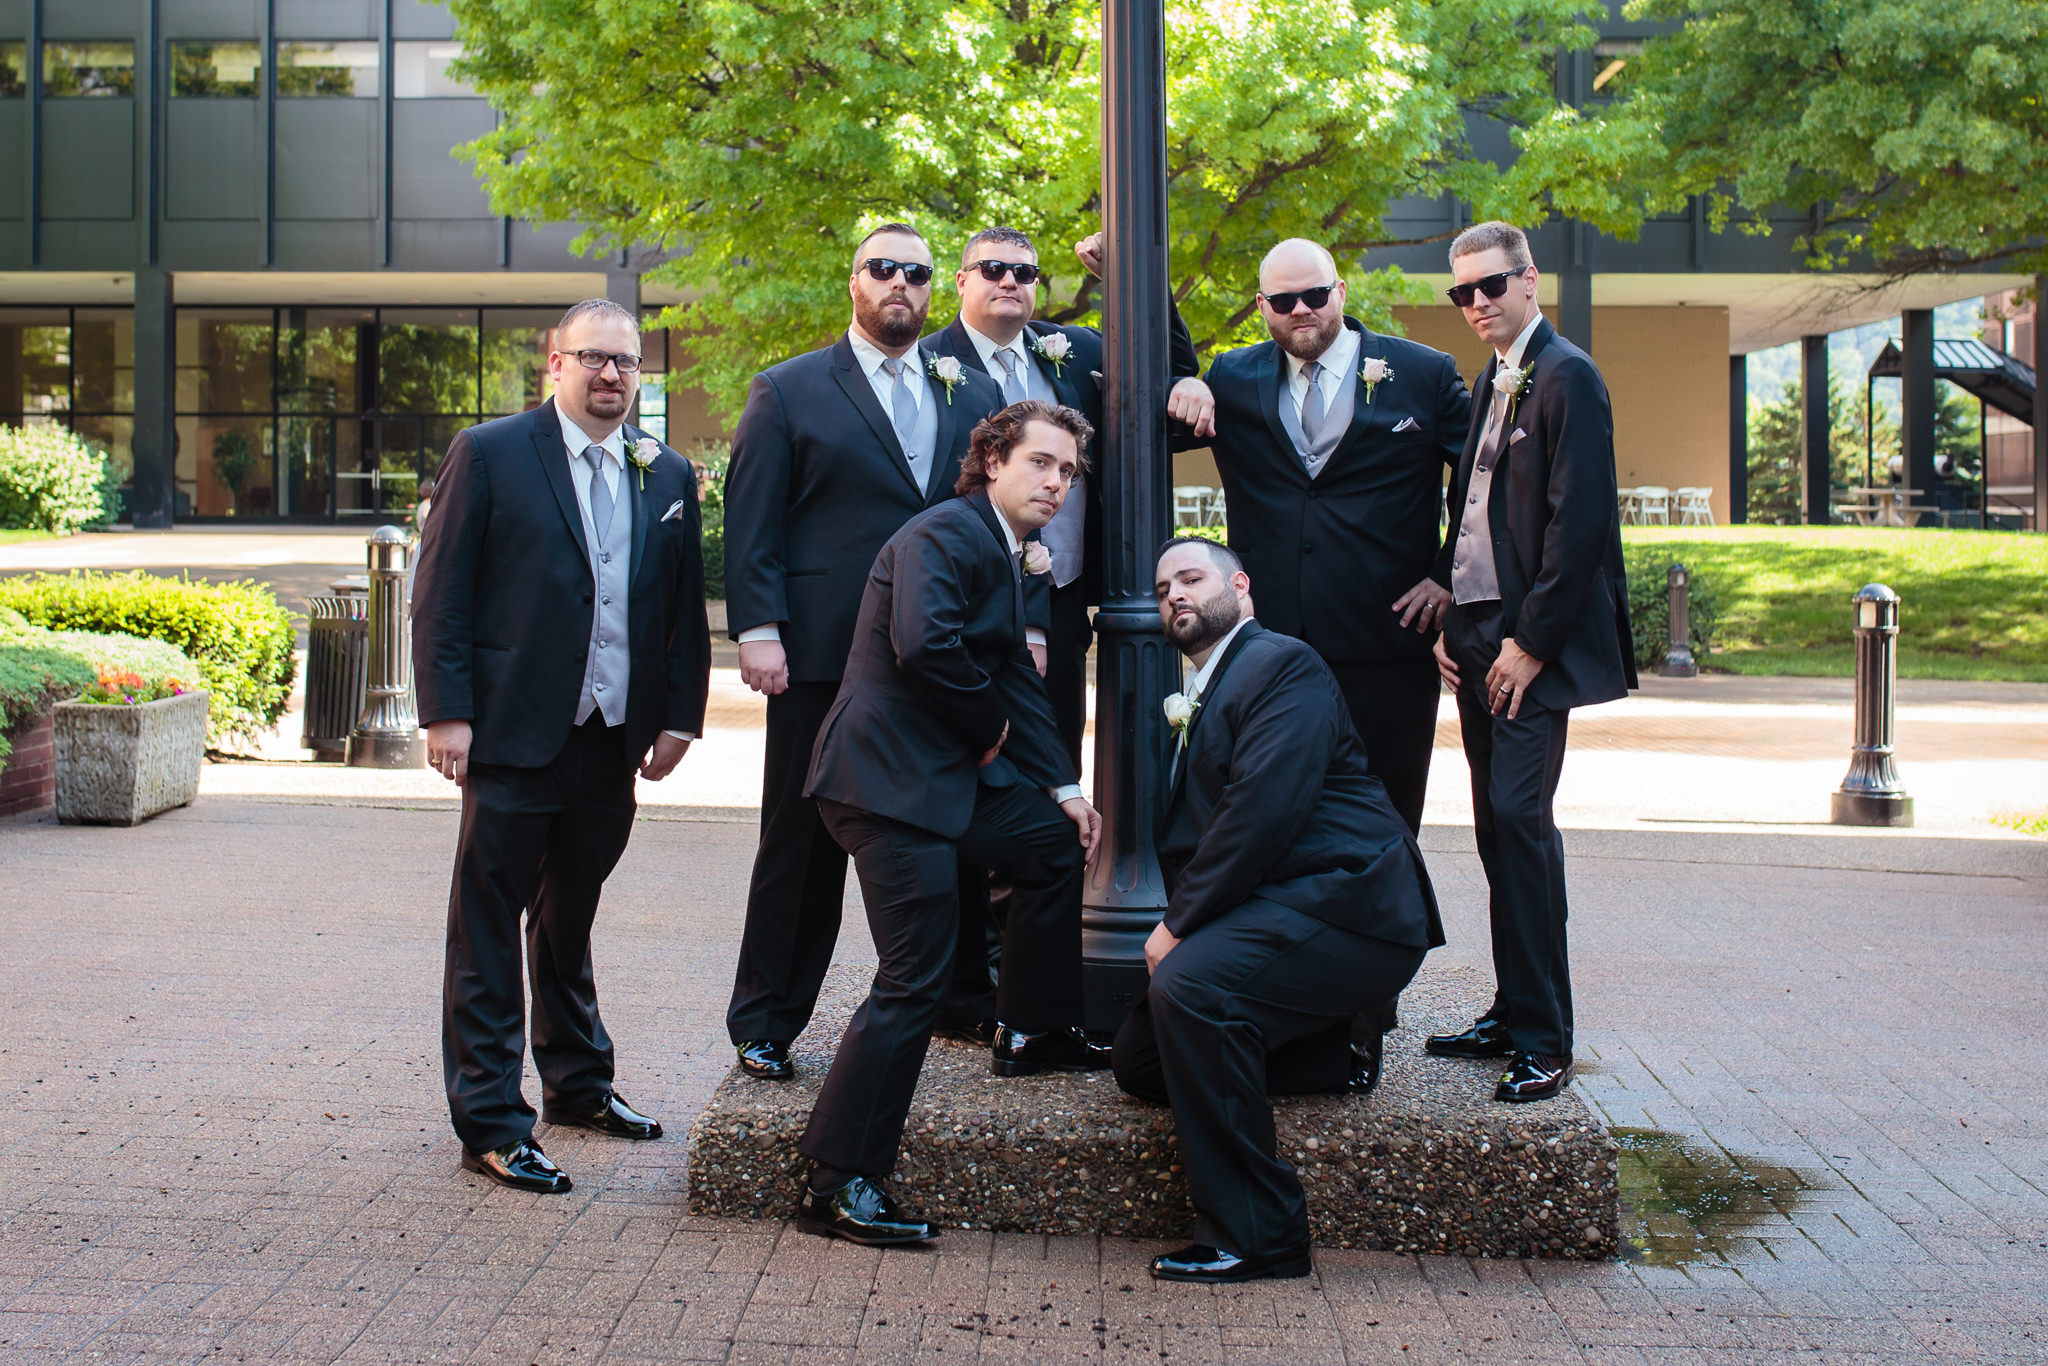 Groomsmen pose like a rock band at Duquesne University